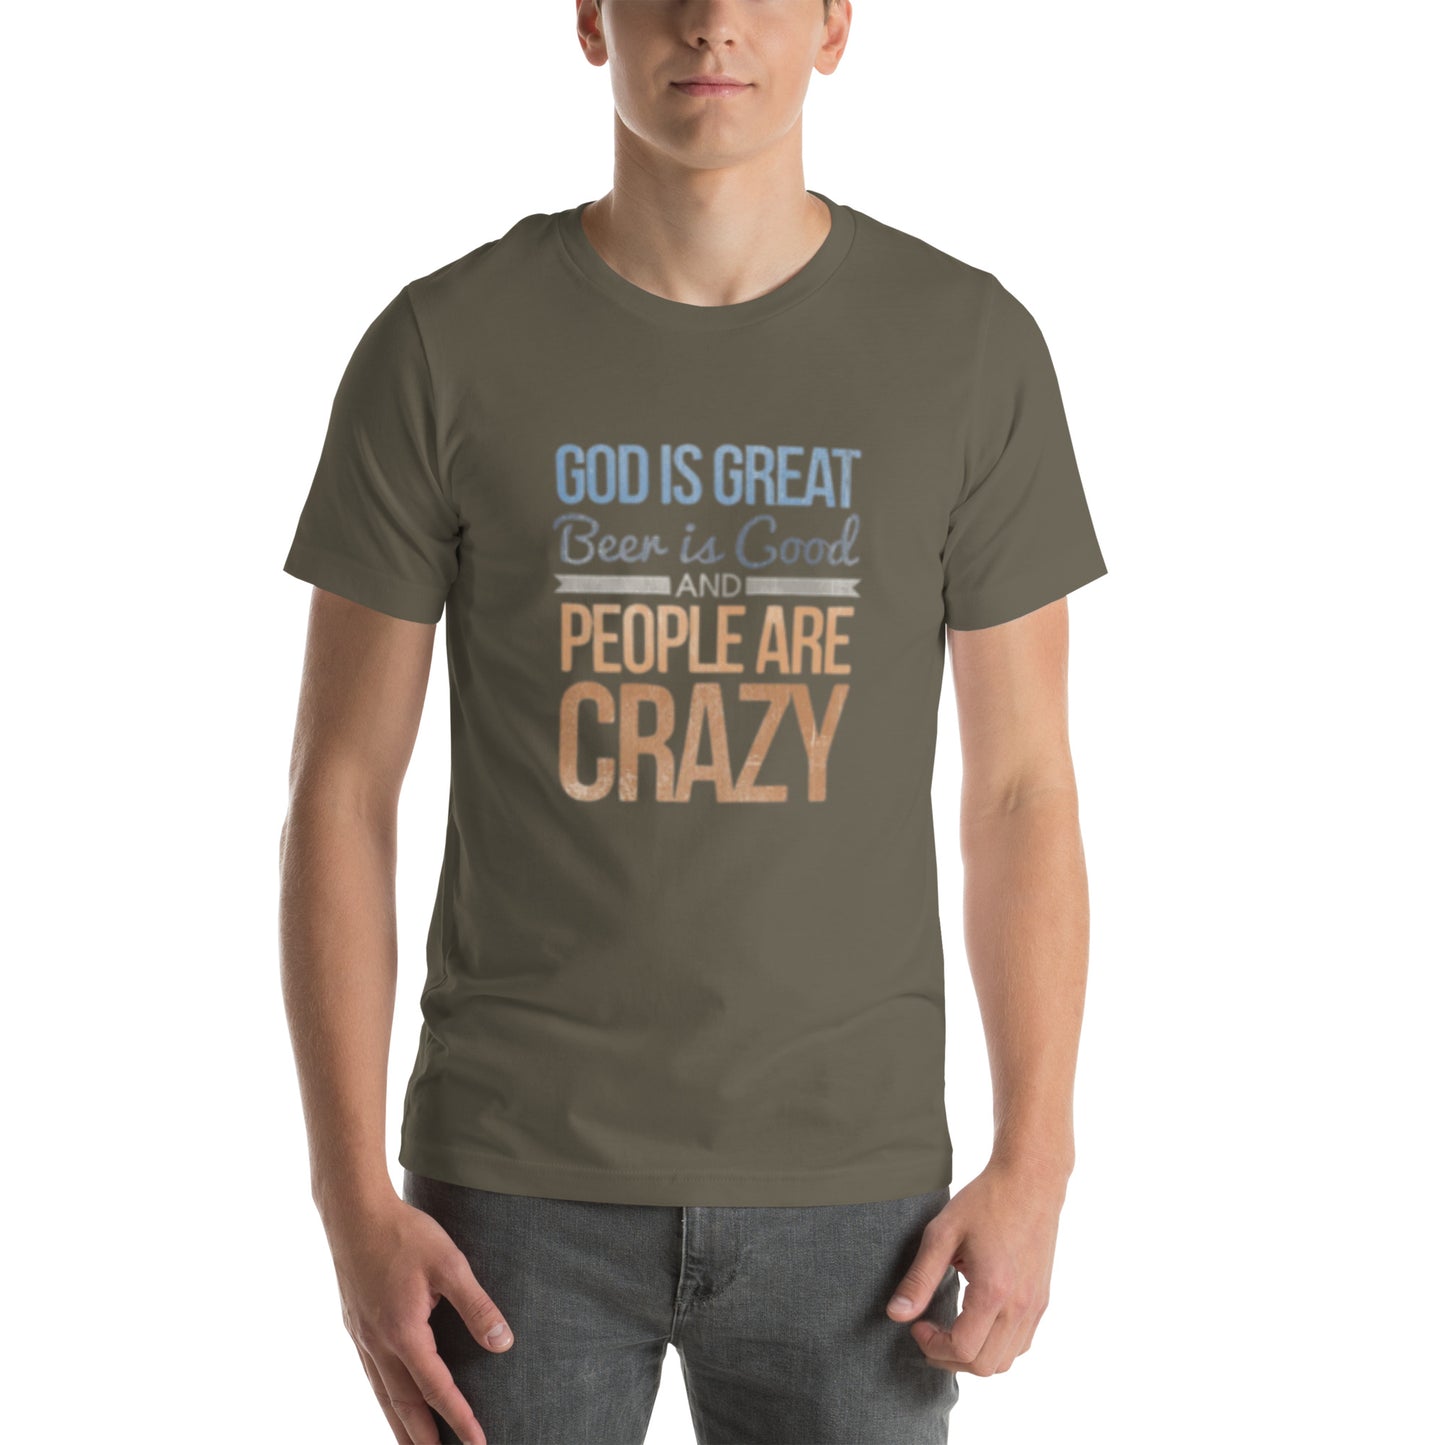 People Are Crazy - Classic Country Tees